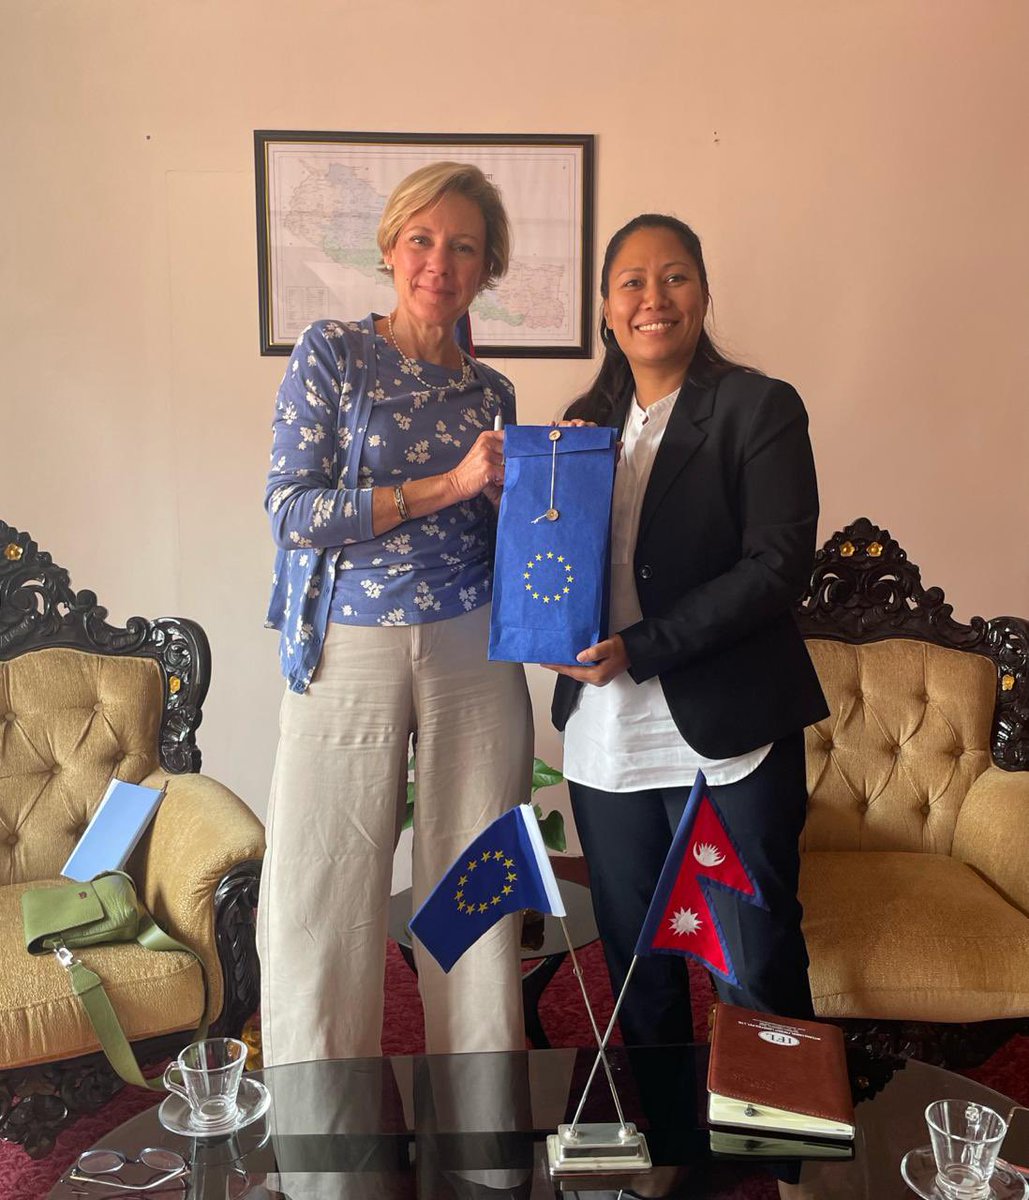 Great to meet Minister of Education today and have an opportunity to explain 🇪🇺long term support to education in Nepal. @SumanaShrestha @eu_eeas @EU_Partnerships